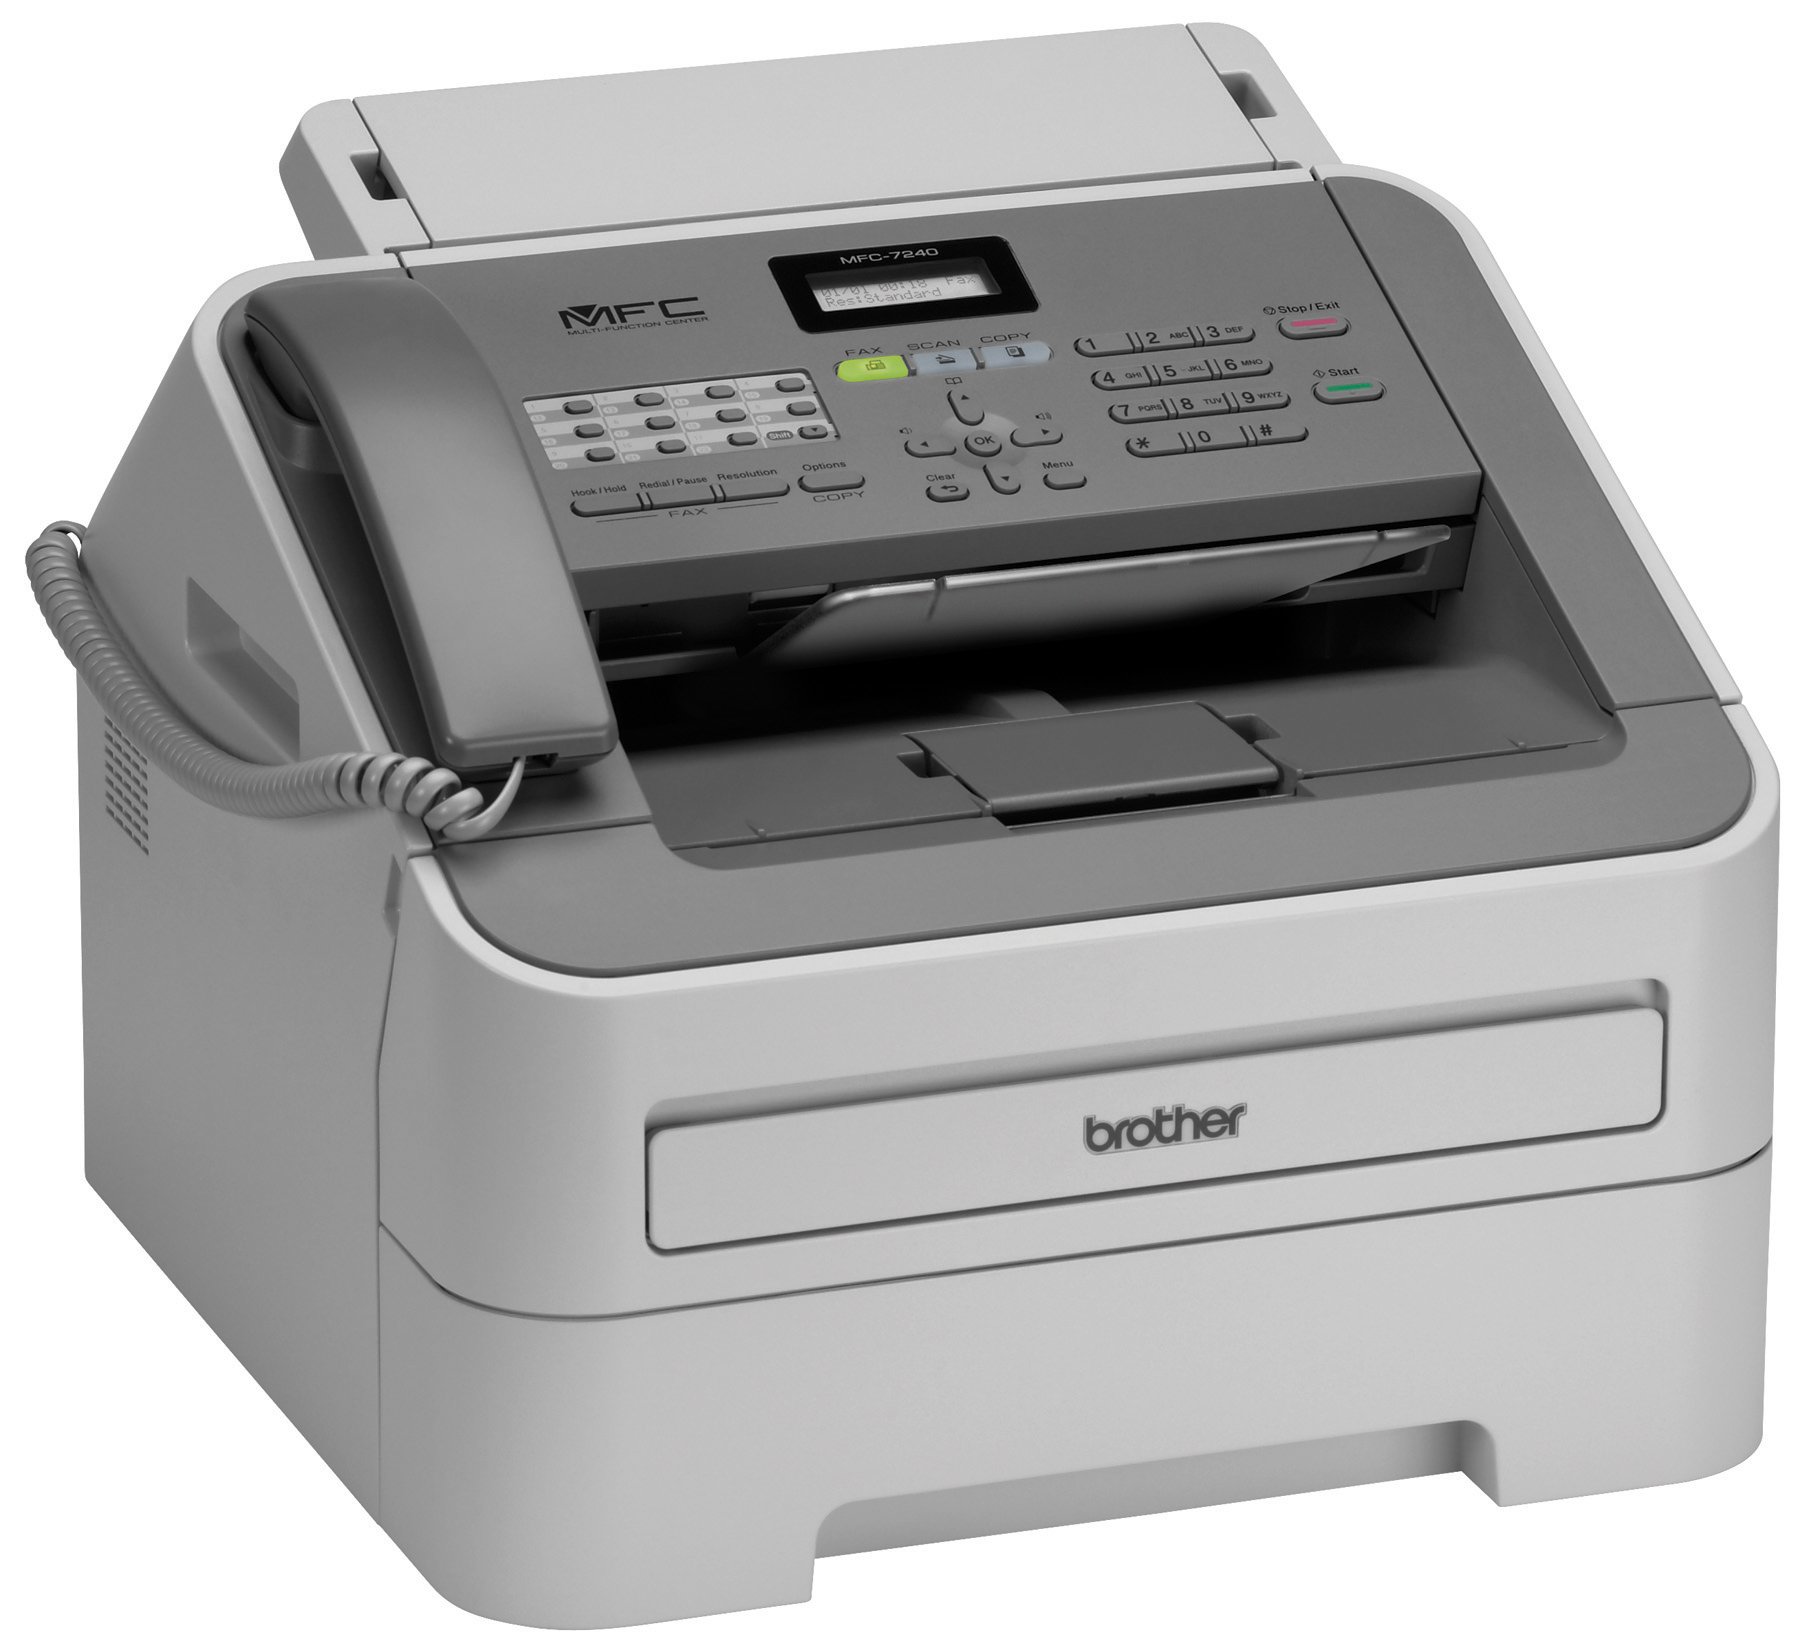 Brother Printer MFC7240 Monochrome Printer with Scanner, Copier and Fax,Grey, 12.2